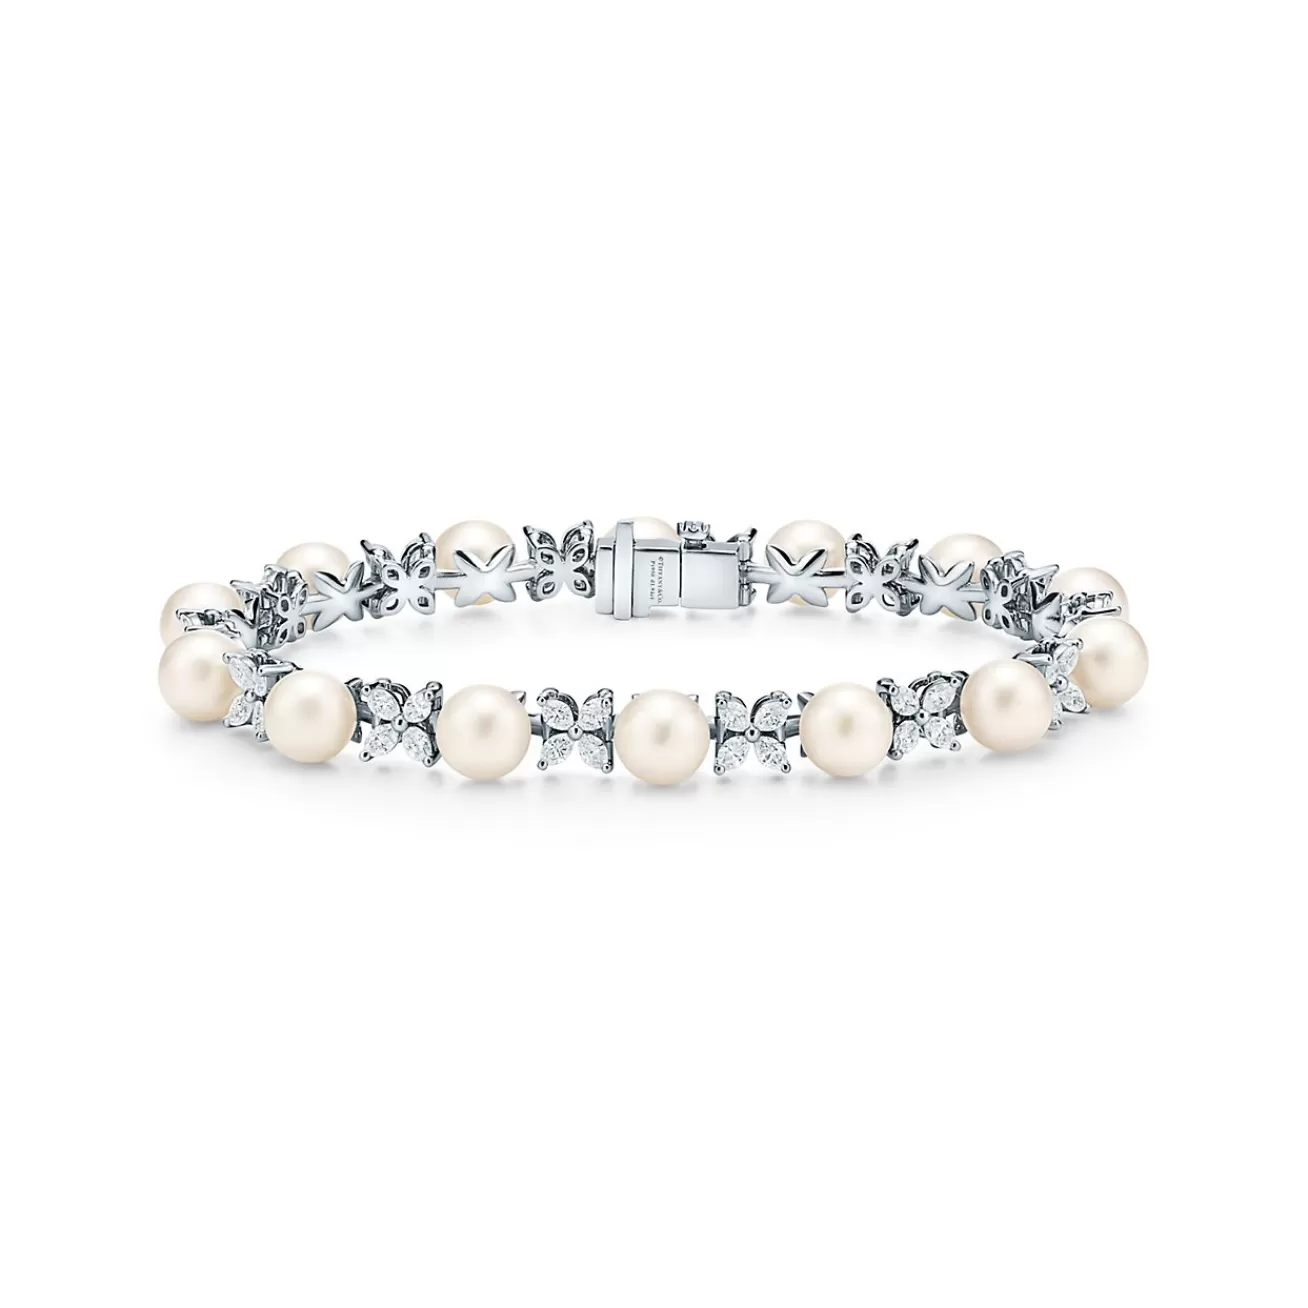 Tiffany & Co. Tiffany Victoria® Tennis Bracelet in Platinum with Diamonds and Pearls | ^ Bracelets | Gifts for Her